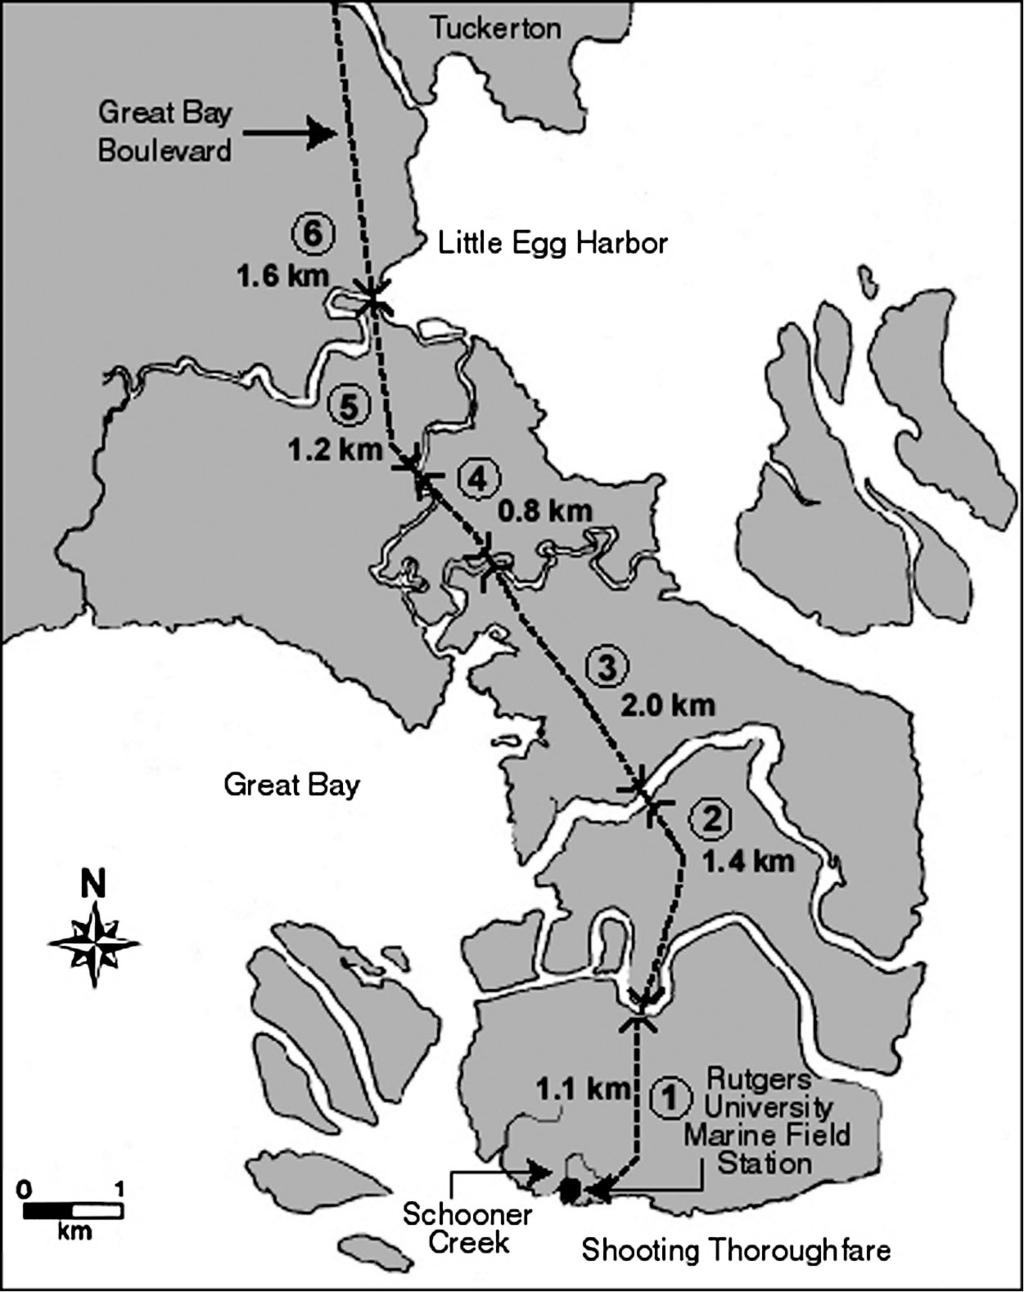 30 S. Szerlag, S.P. McRobert Figure 1. Detailed map of the study site, Great Bay Boulevard in the Jacques Cousteau National Estuarine Research Reserve (see Hoden and Able, 2003).